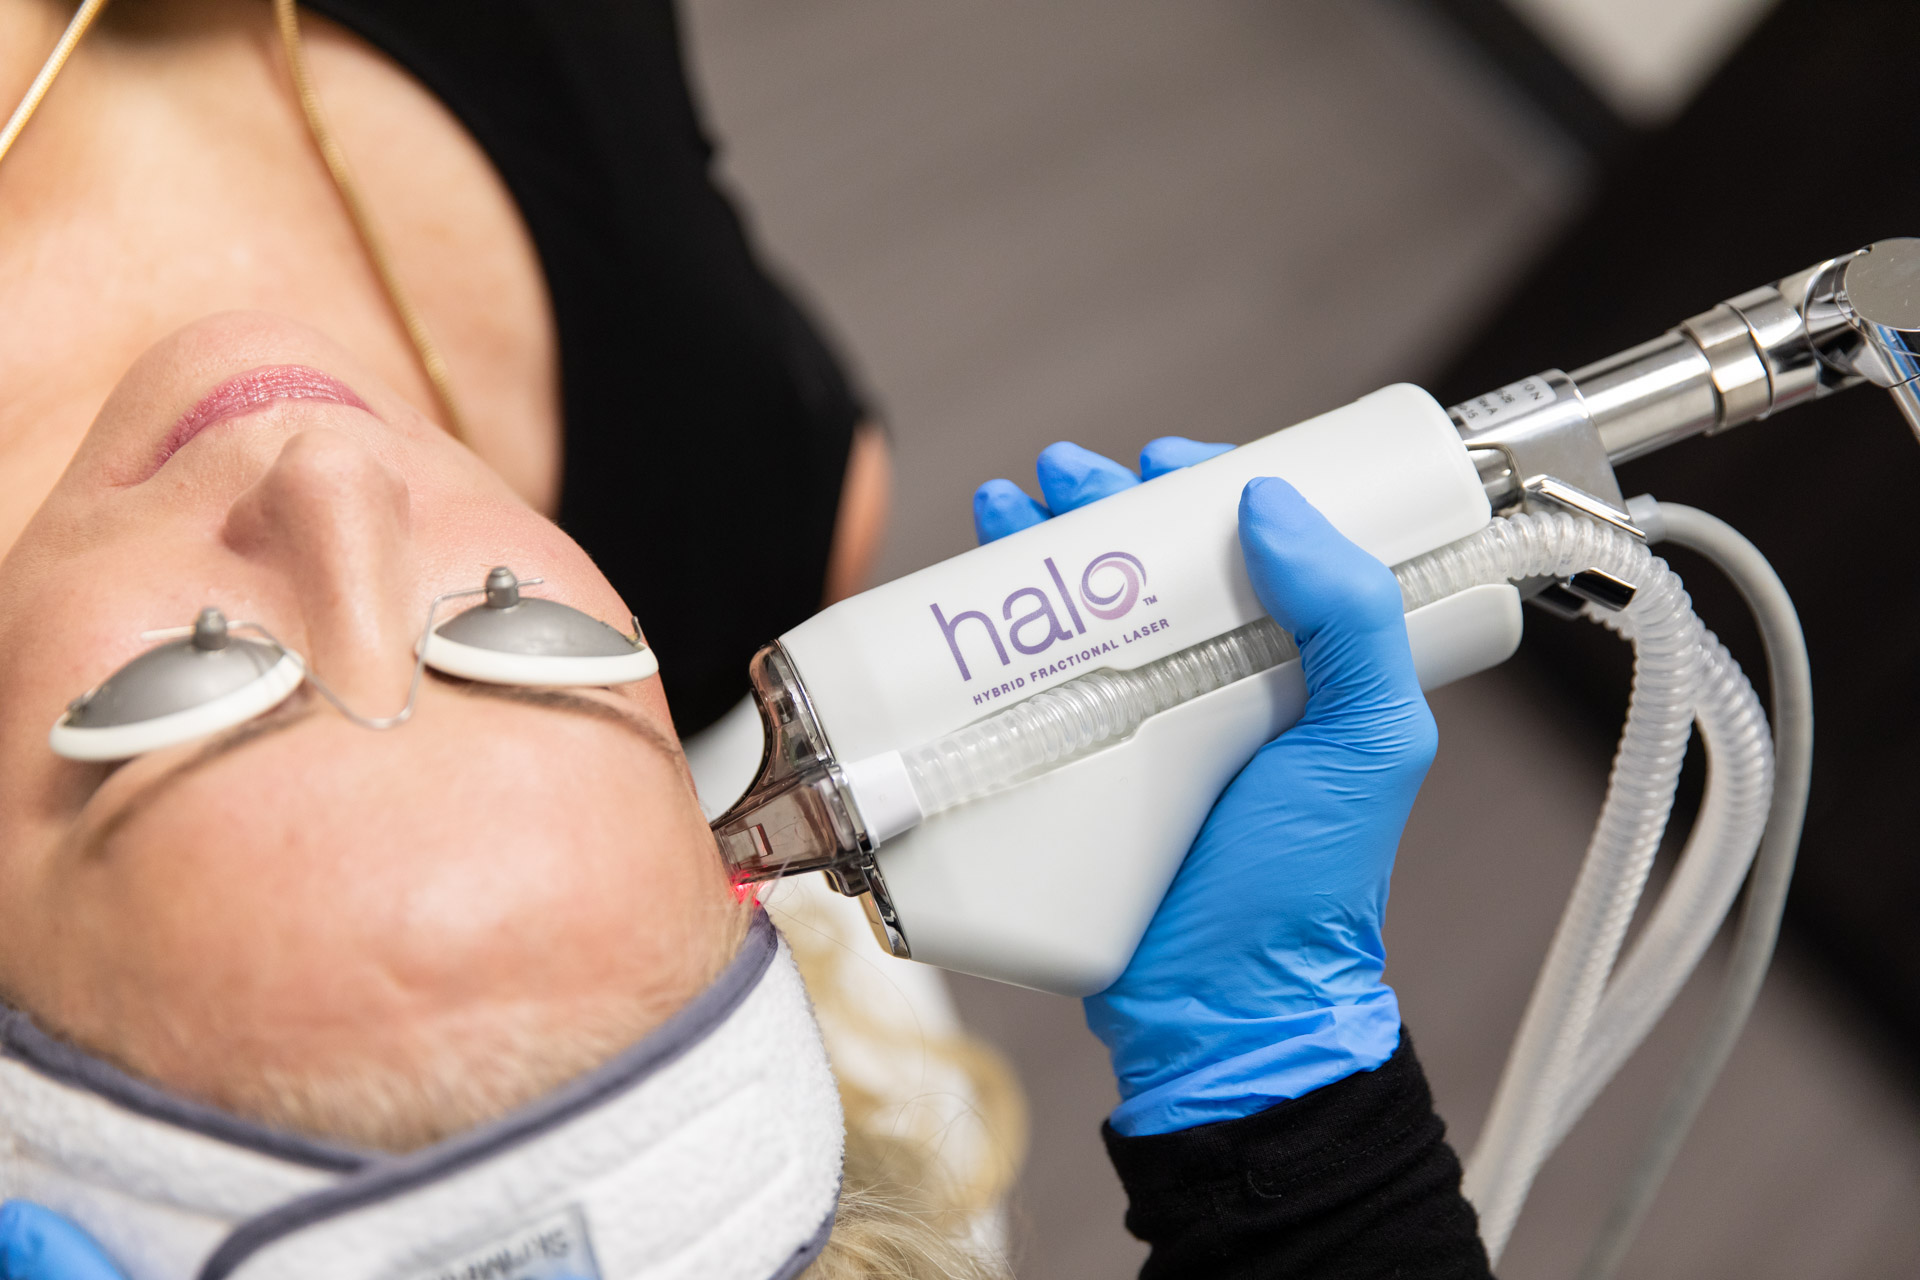 A woman receives HALO, a low downtime laser treatment in Houston